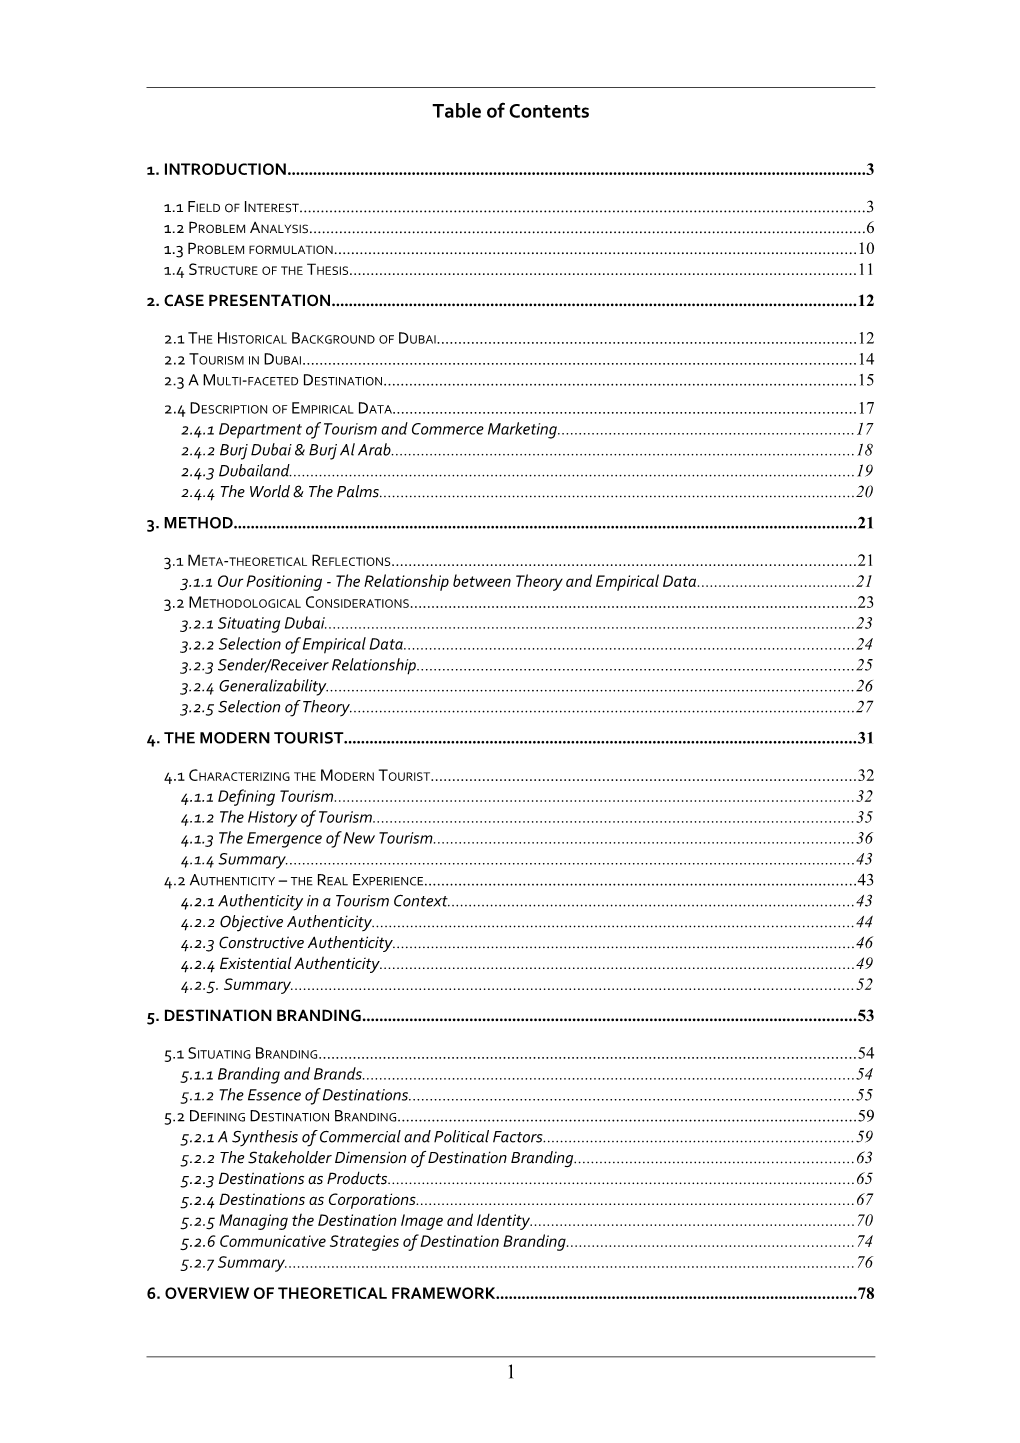 Table of Contents s488